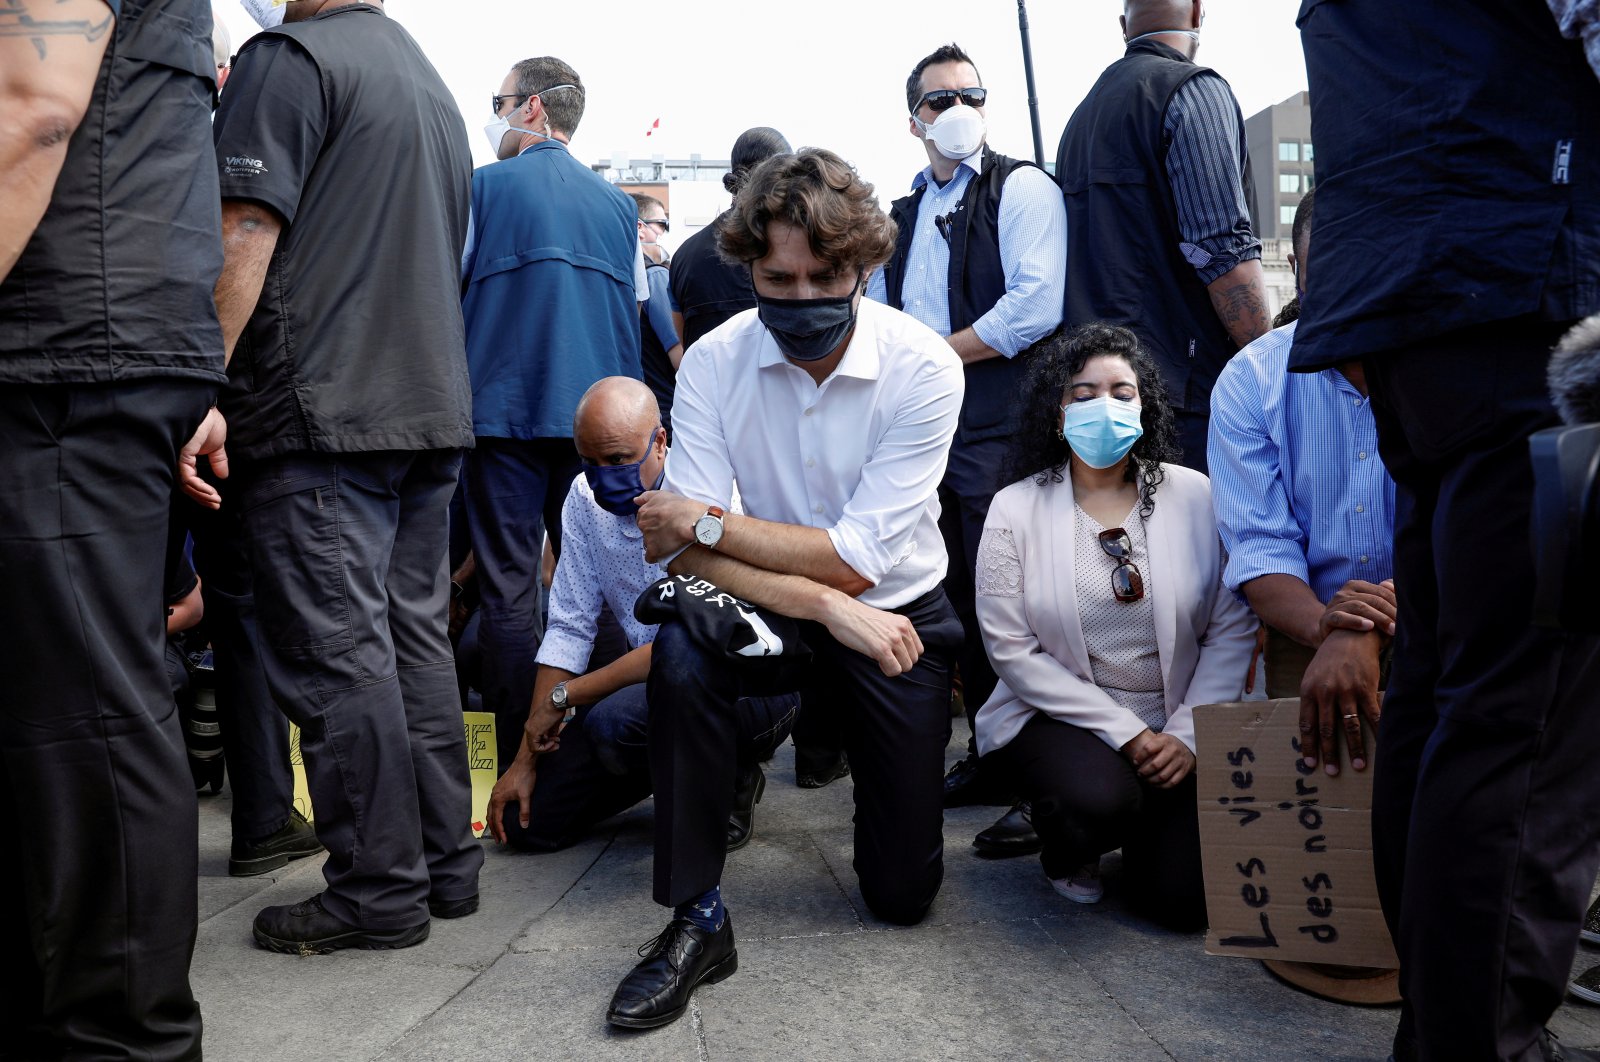 Canada's Prime Minister Justin Trudeau wears a mask as he takes a knee during a rally against the death in Minneapolis police custody of George Floyd, on Parliament Hill, in Ottawa, Ontario, Canada June 5, 2020. (Reuters Photo)